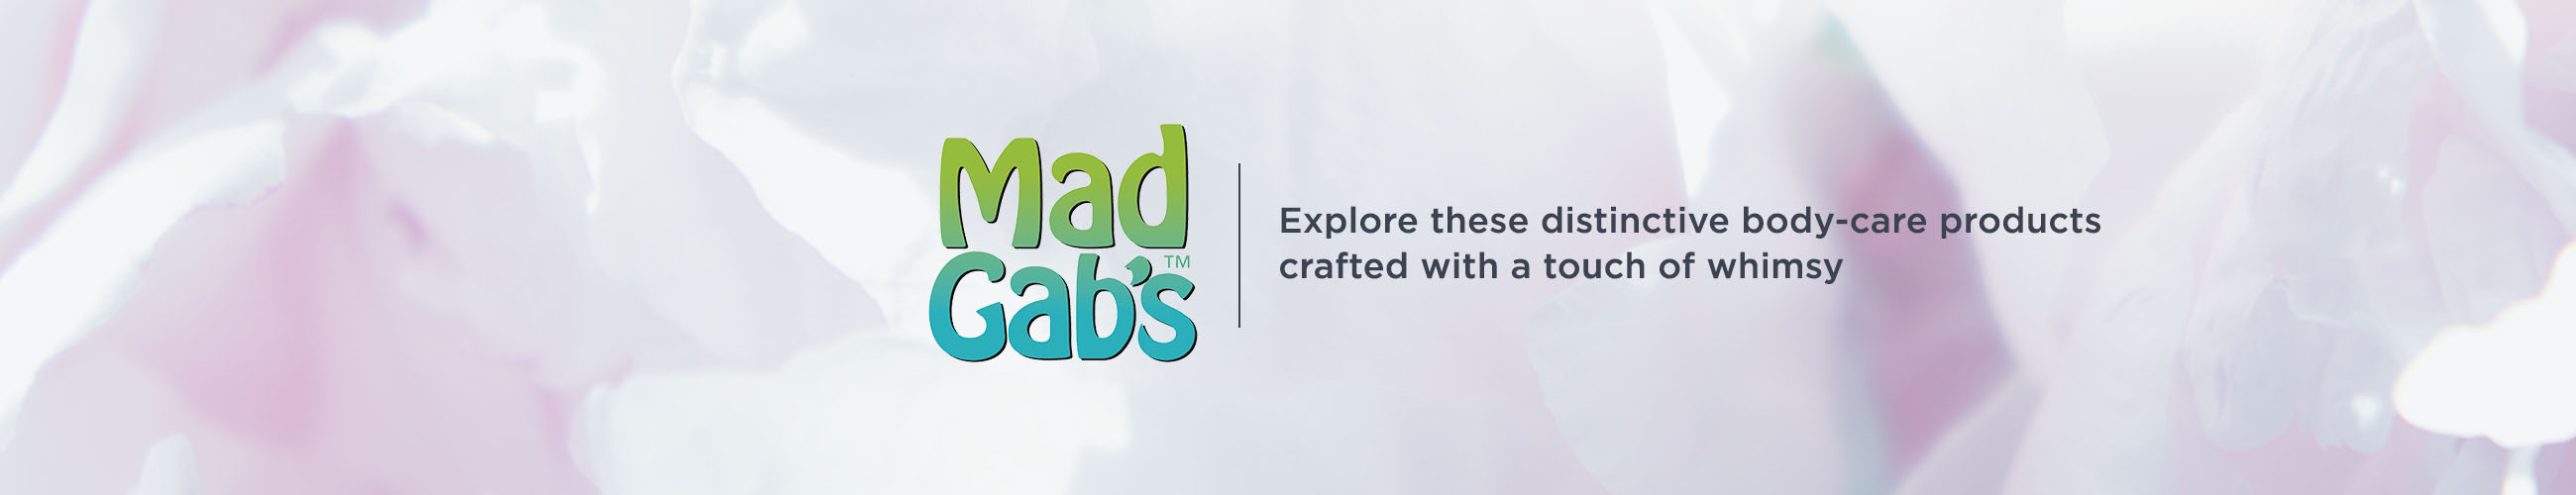 Mad Gab's,  Explore these distinctive body-care products crafted with a touch of whimsy